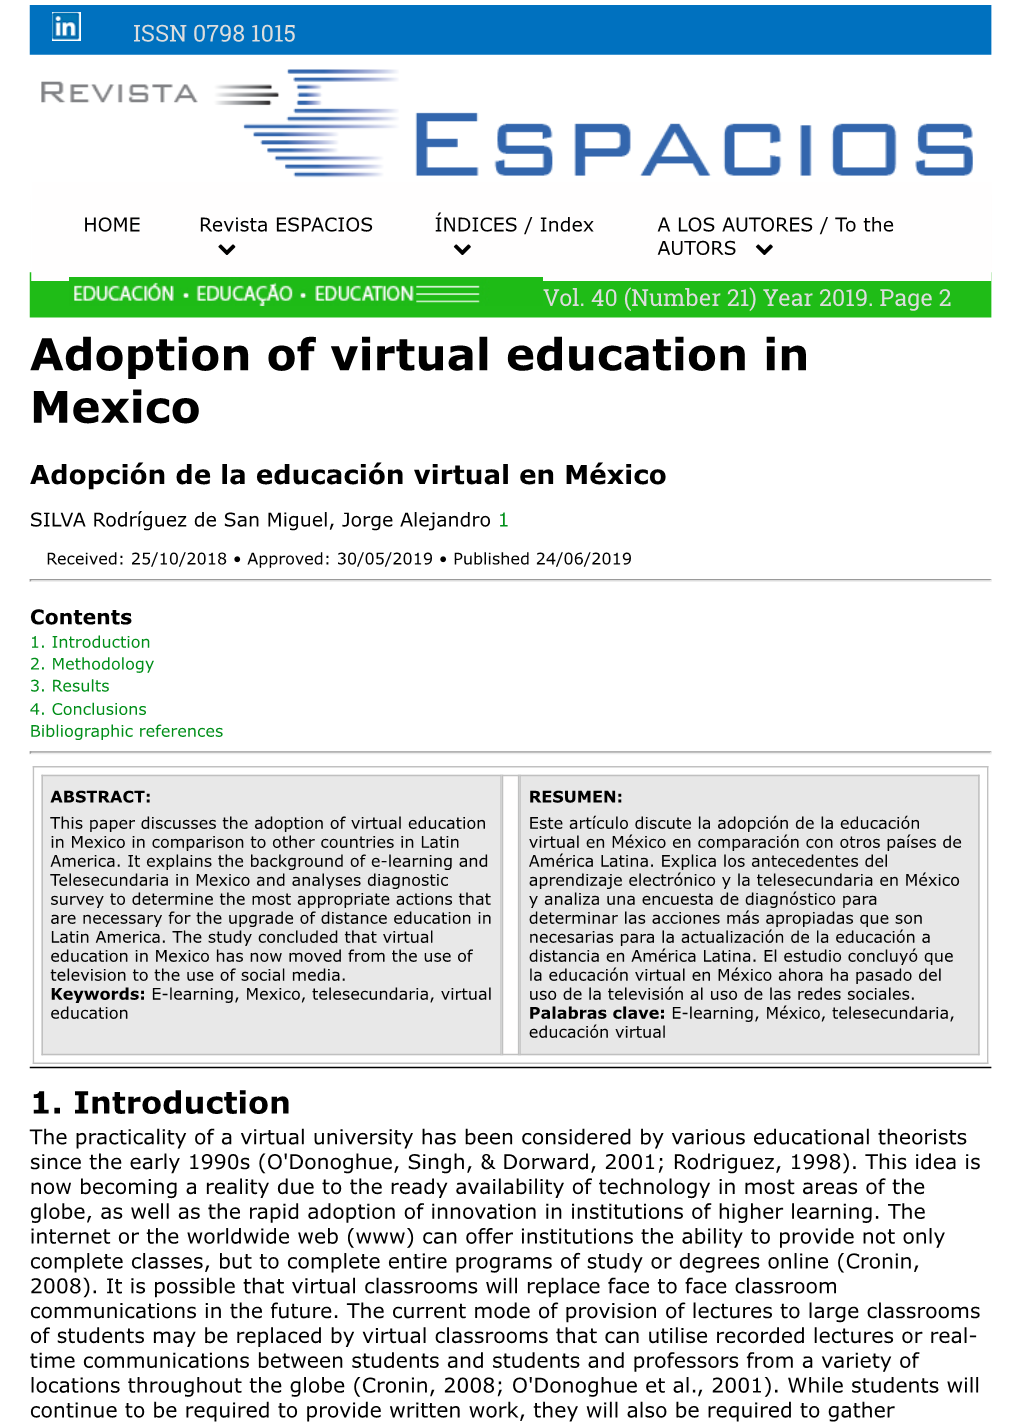 Adoption of Virtual Education in Mexico